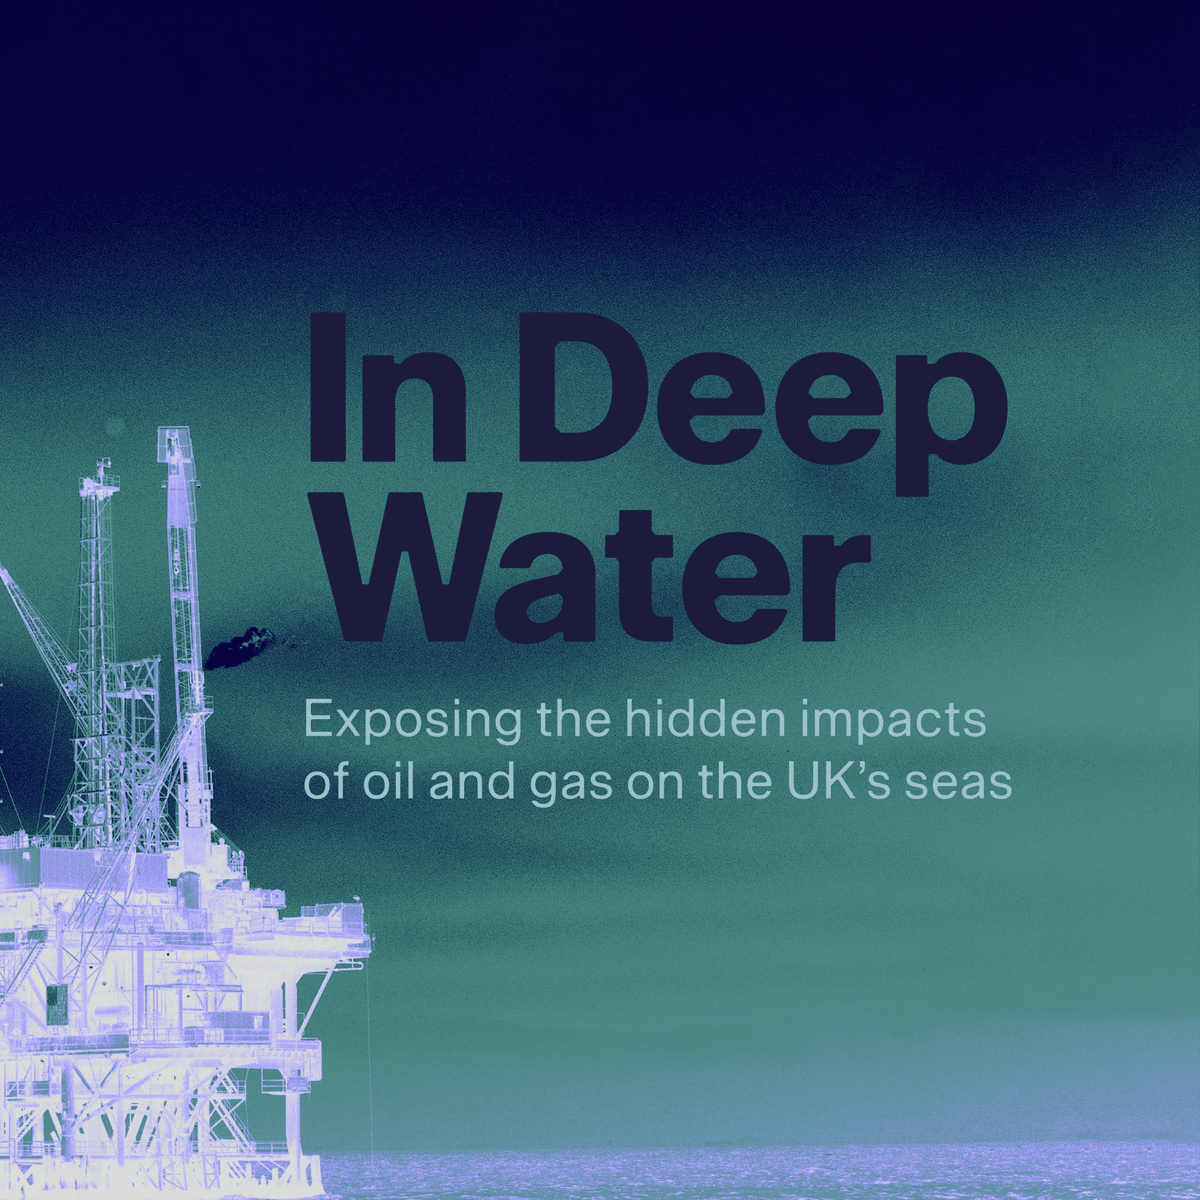 Fossil fuel giants are destroying our oceans.

We released the #InDeepWater report exposing the hidden impacts of #OffshoreDrilling for oil and gas on the UK’s seas, in collaboration with fossil fuel campaigners and friends Uplift.

🧵uk.oceana.org/reports/in-dee…